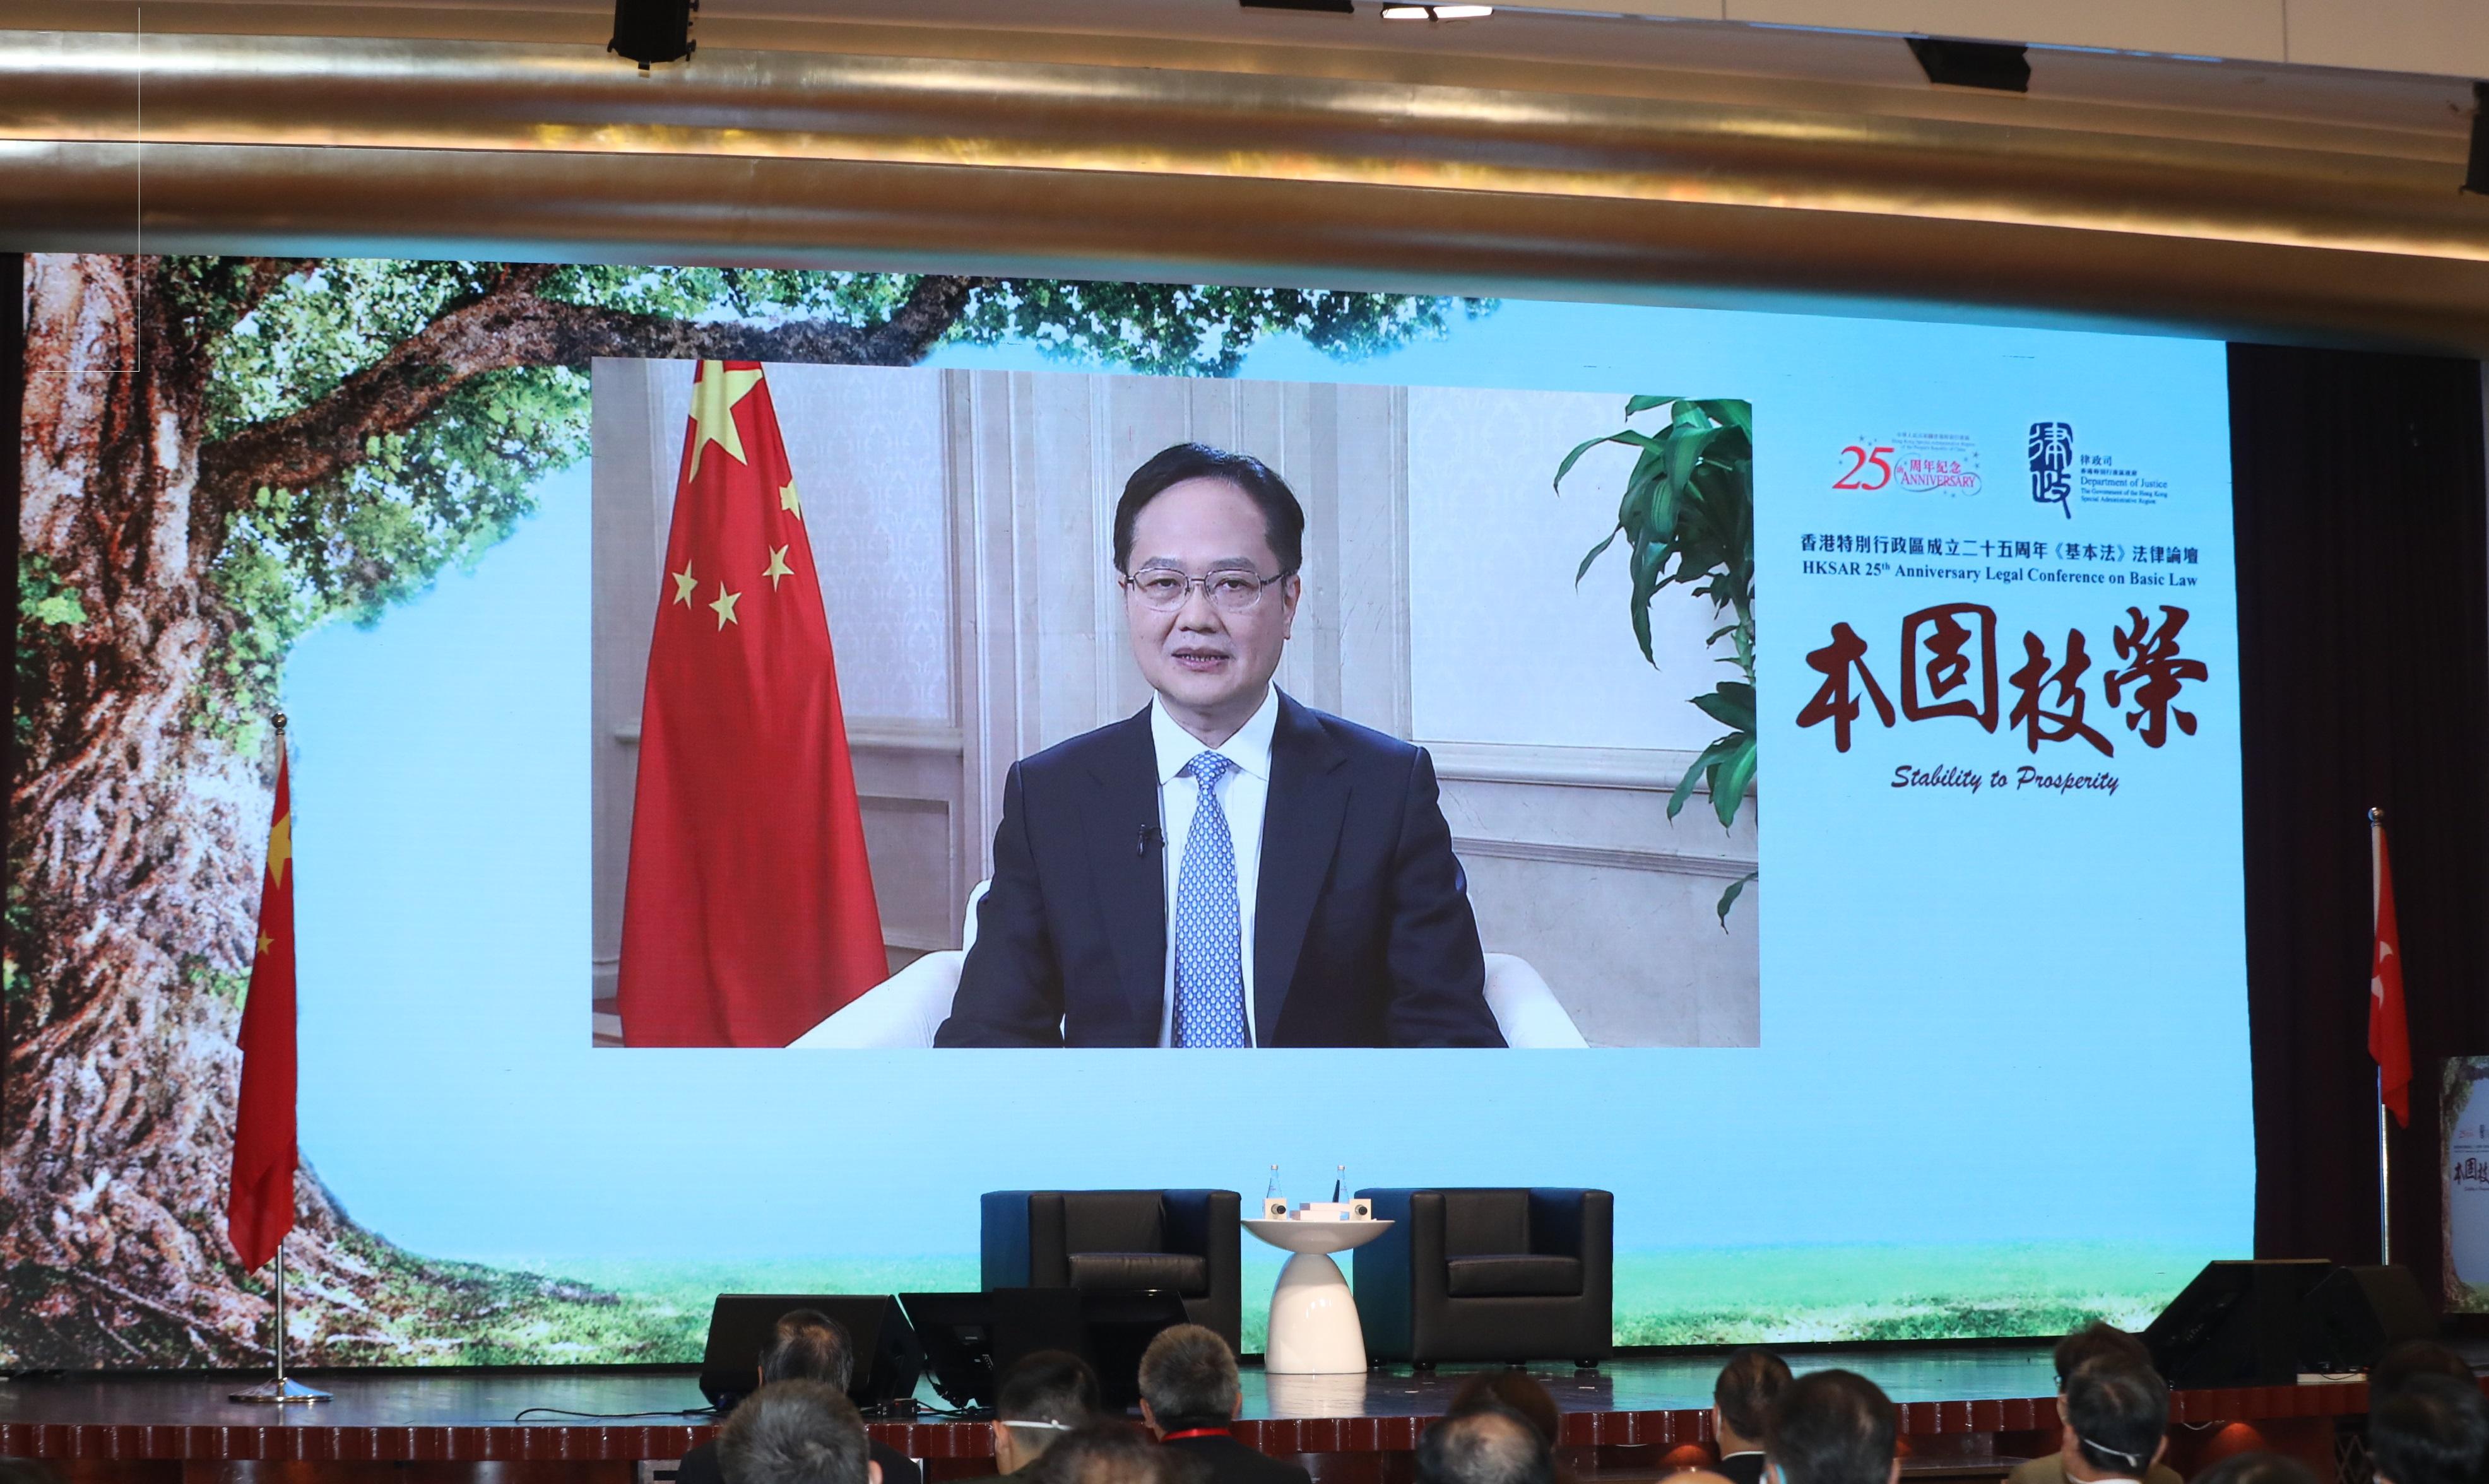 The Hong Kong Special Administrative Region (HKSAR) 25th Anniversary Legal Conference on Basic Law "Stability to Prosperity" was hosted by the Department of Justice today (May 27). Photo shows Deputy Director of the Liaison Office of the Central People's Government in the HKSAR Mr Chen Dong delivering welcome remarks at the opening ceremony.